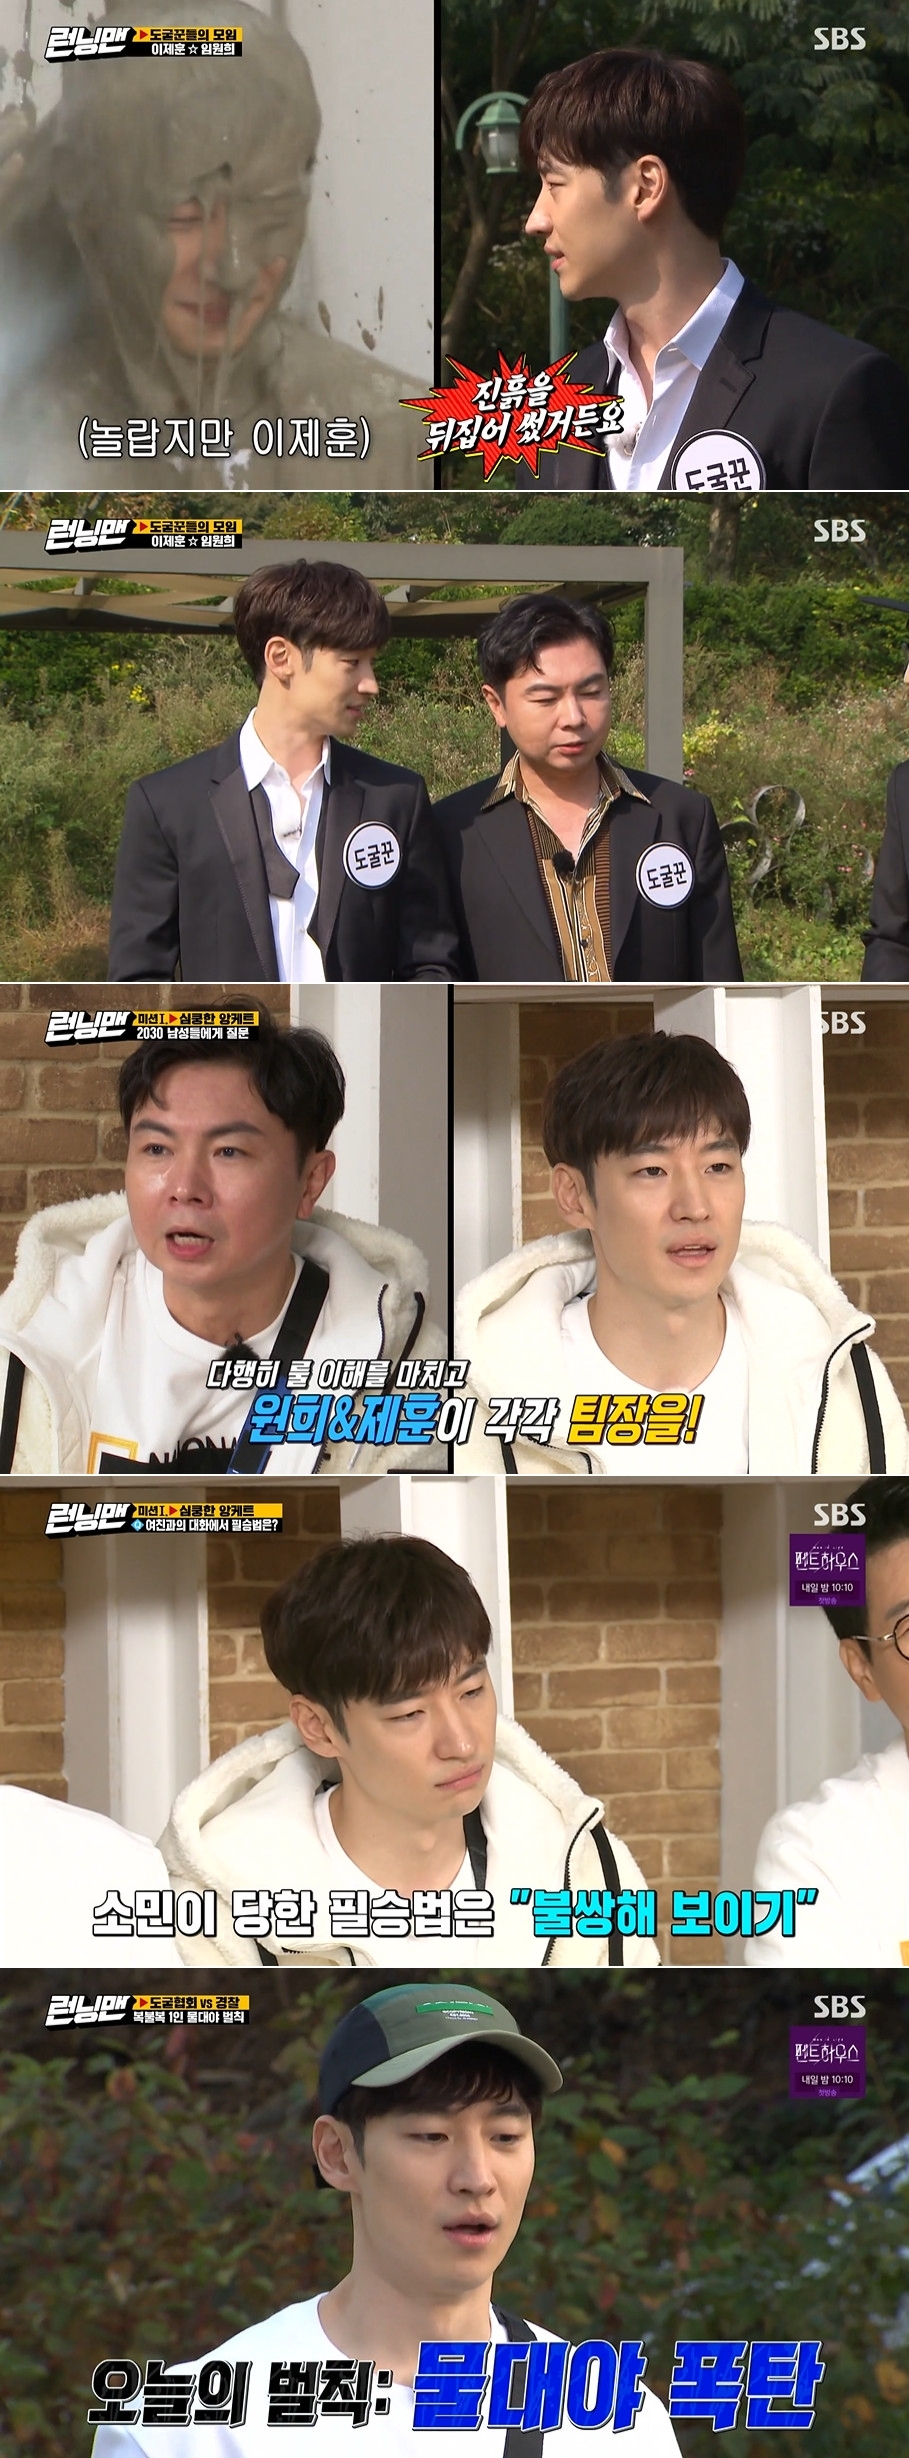 Lee Je Hoon Lee Kwang Soo Who Washed Away Humiliation For Running Man Four Years Also Have A Startled Cheeky Charm